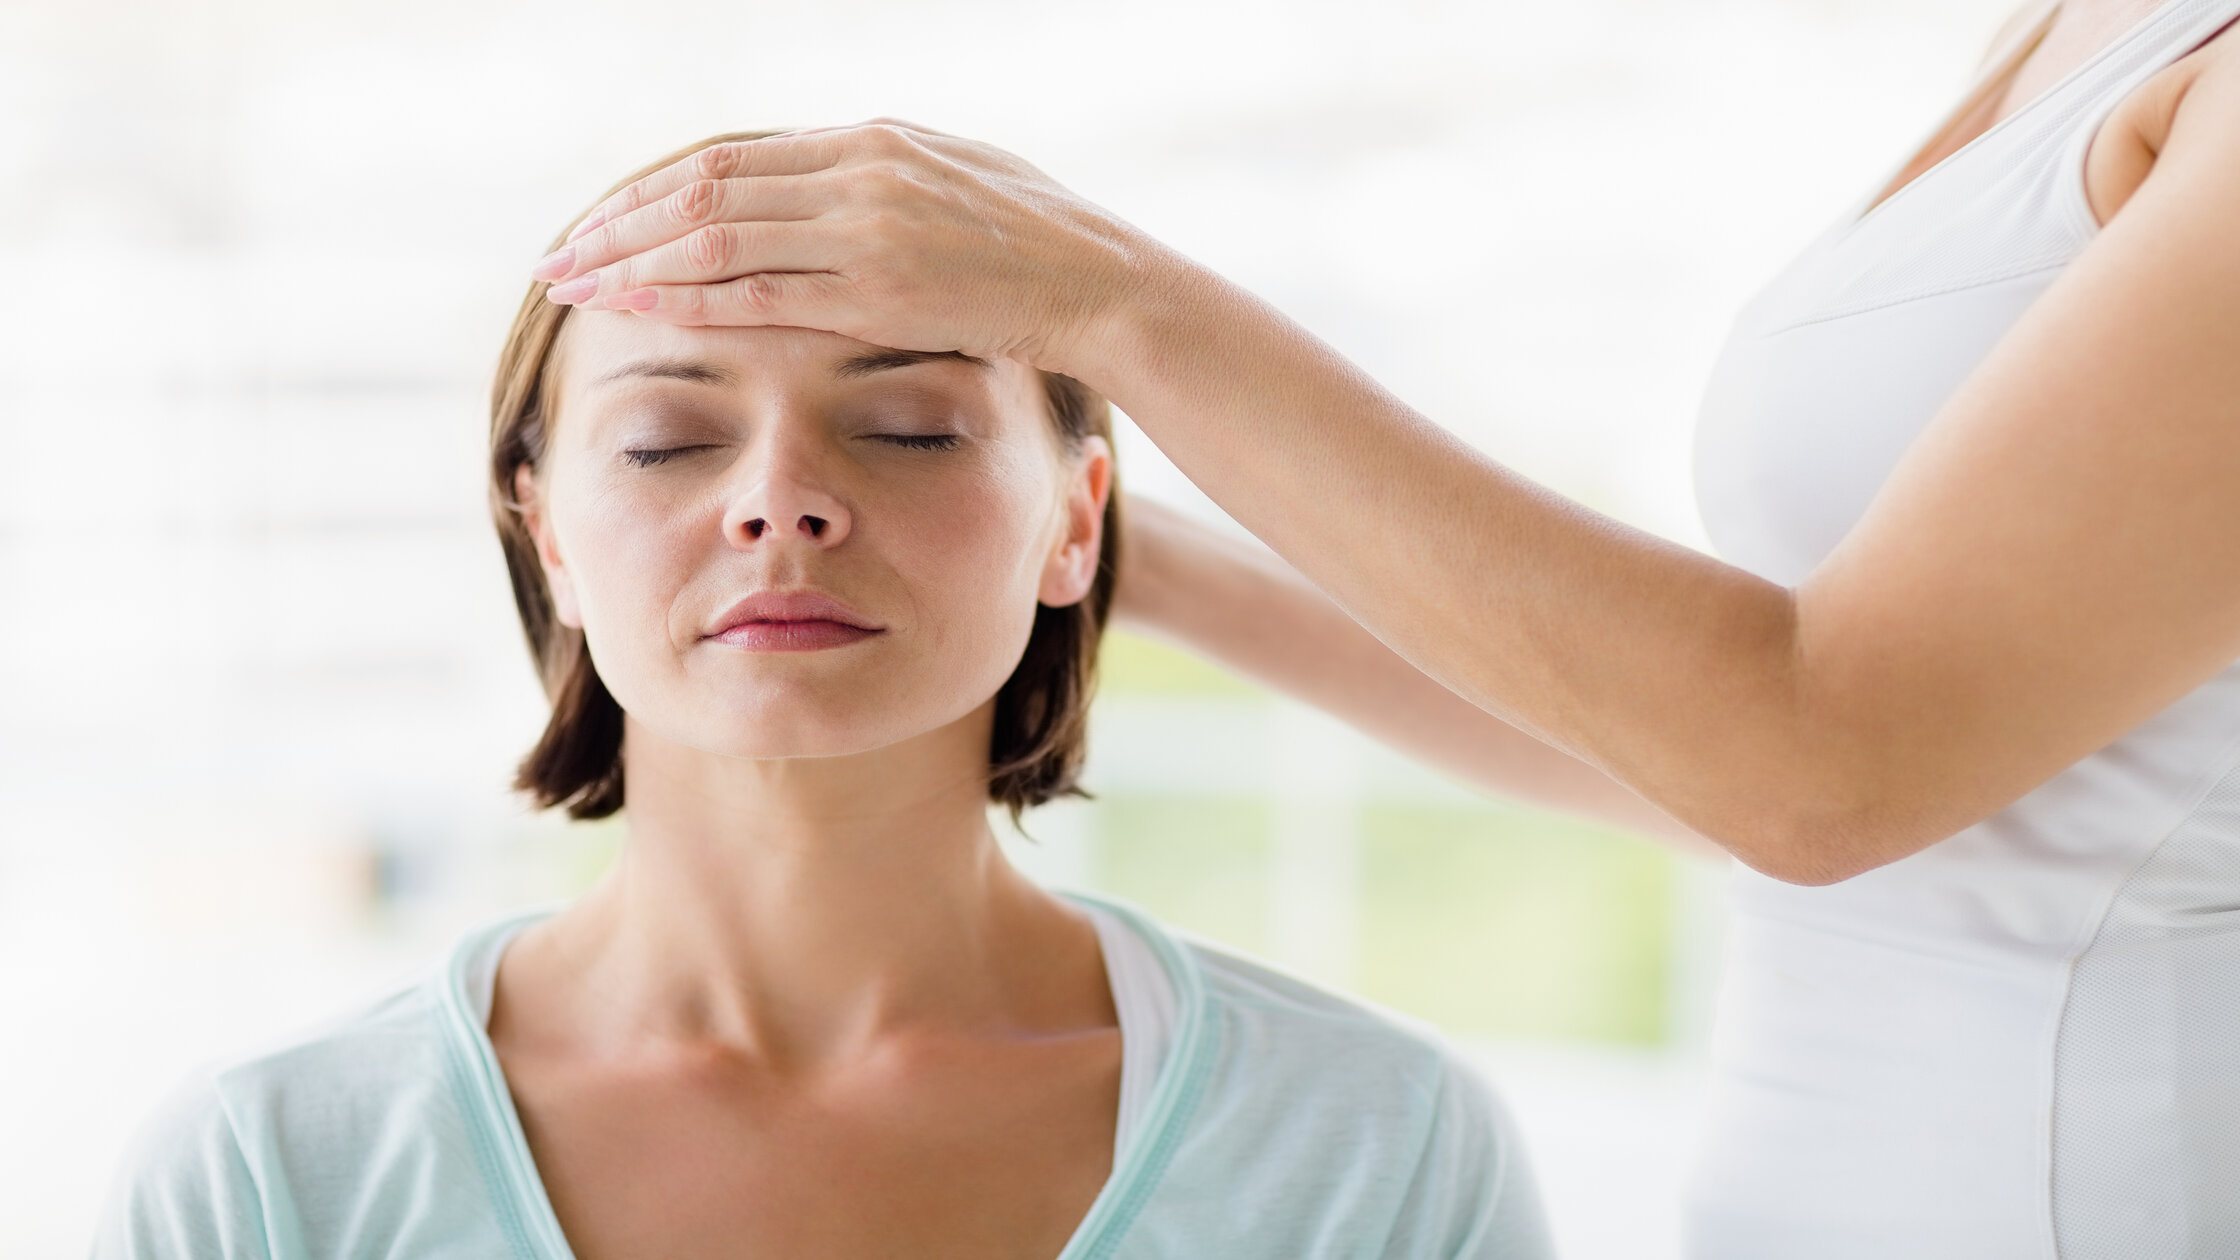 Procedure of Physical Therapy for headaches & migraines